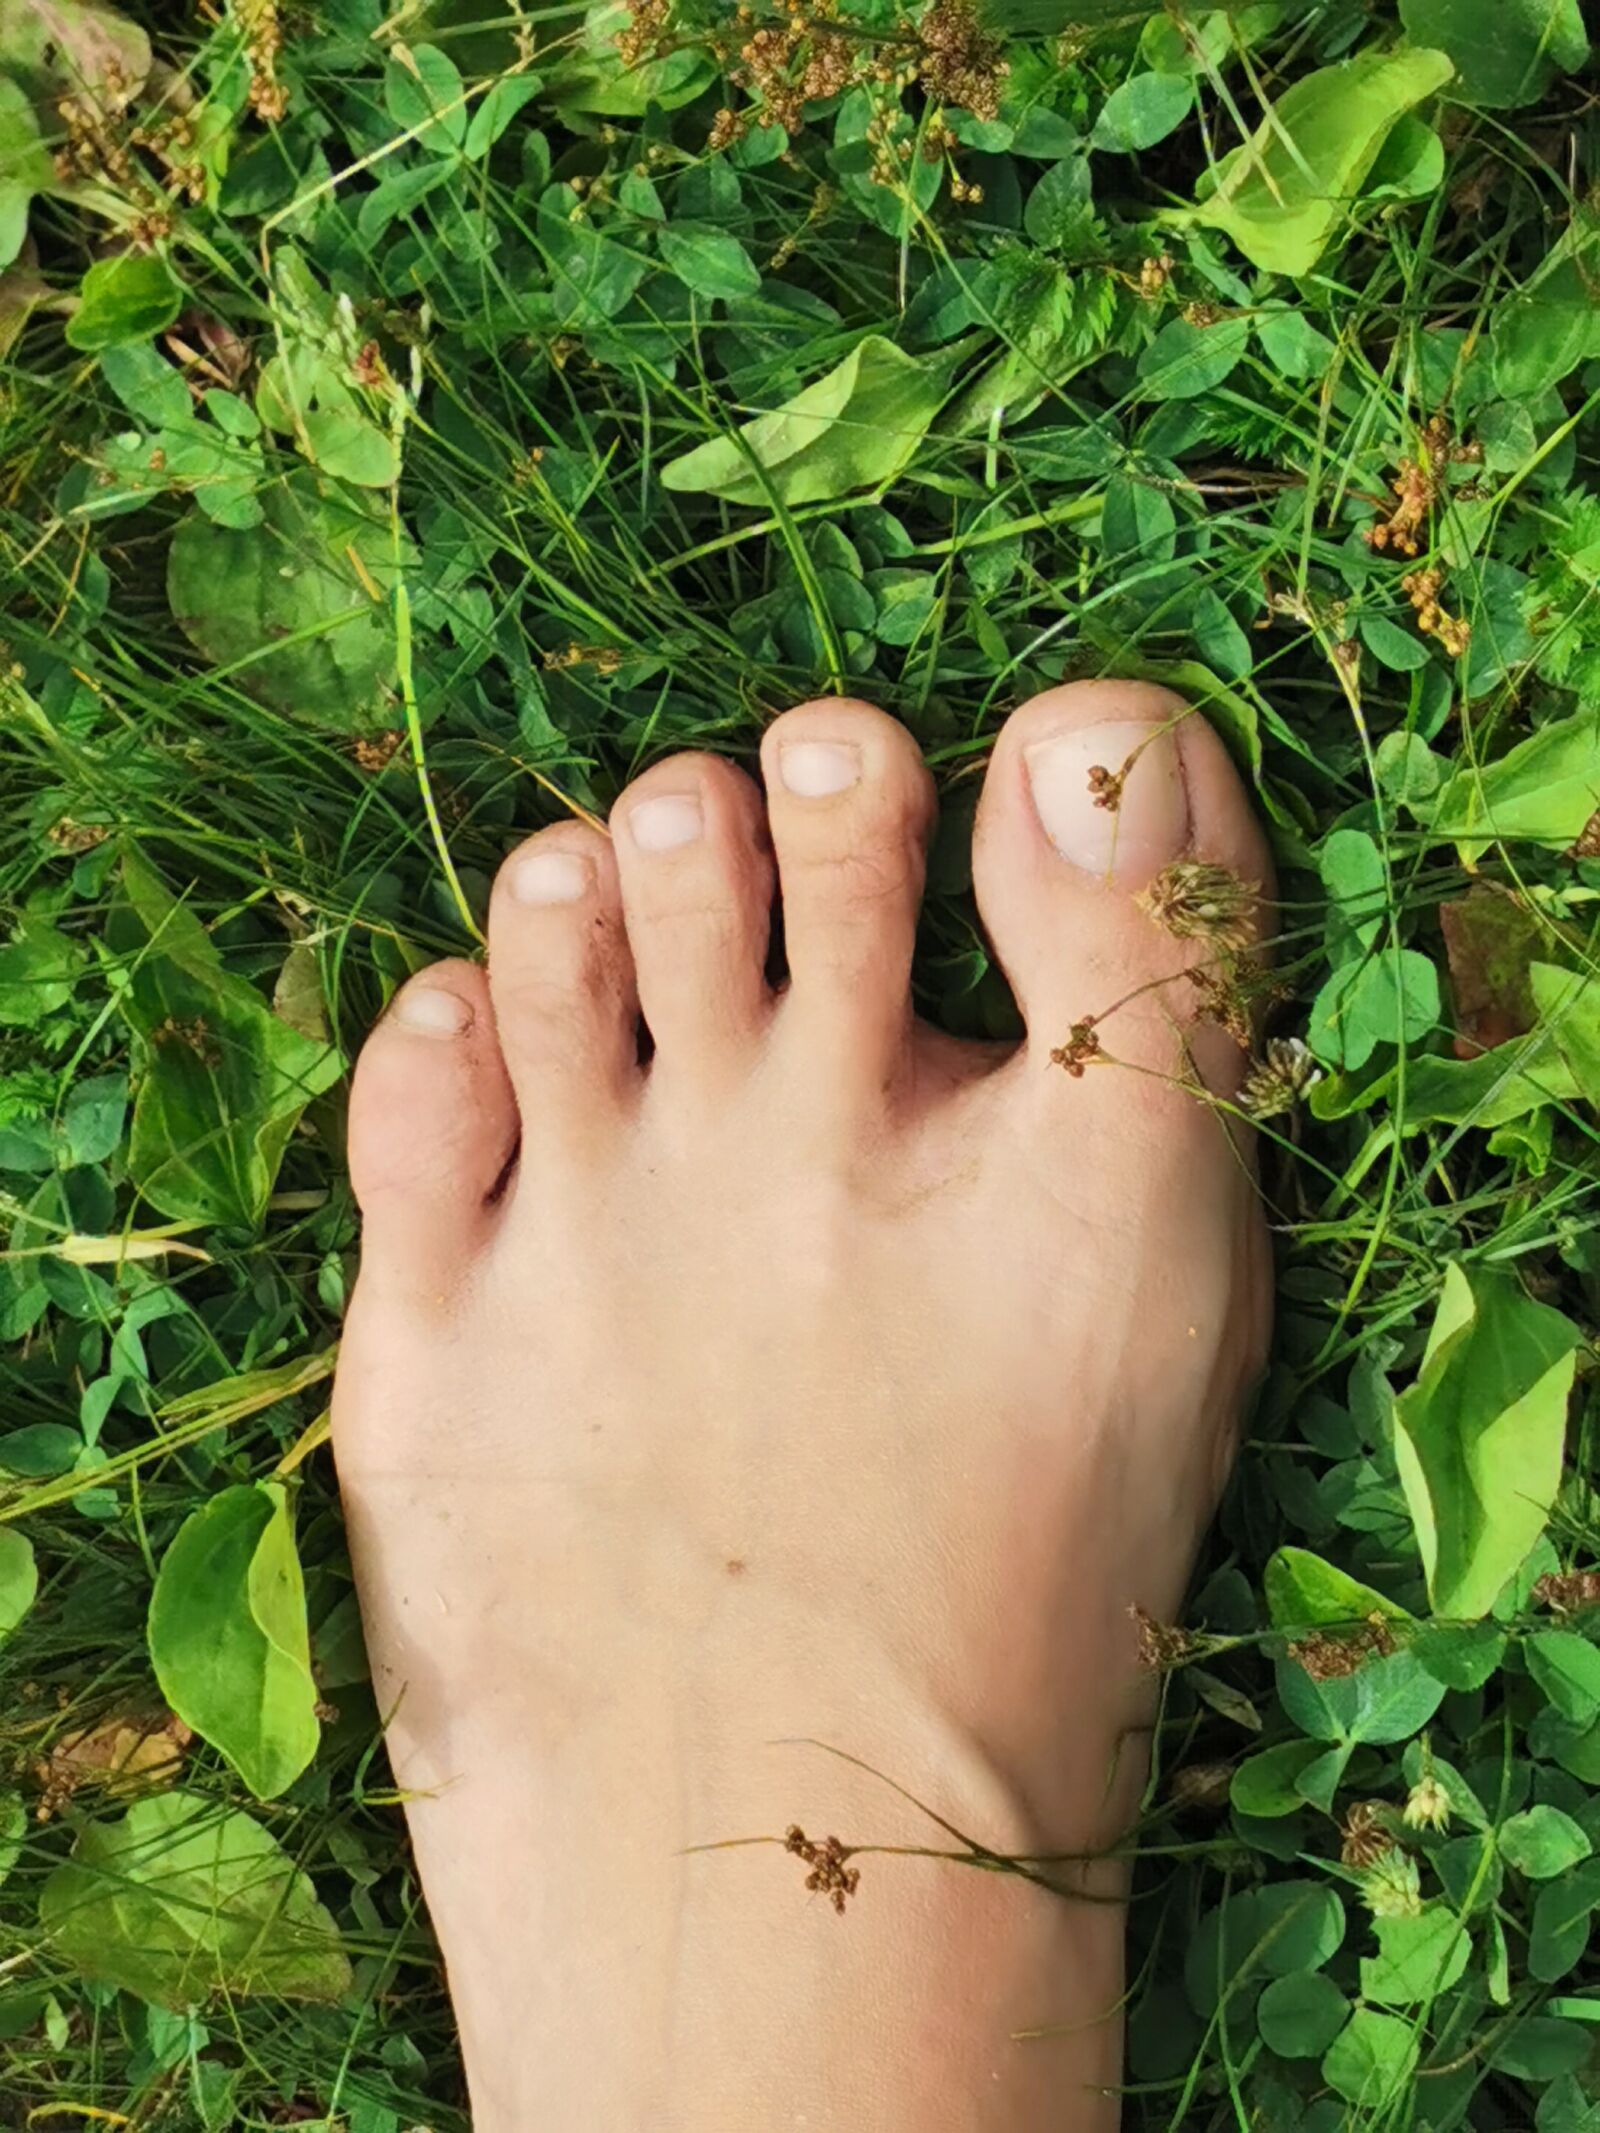 HUAWEI P30 Pro sample photo. Foot, grass, nature photography